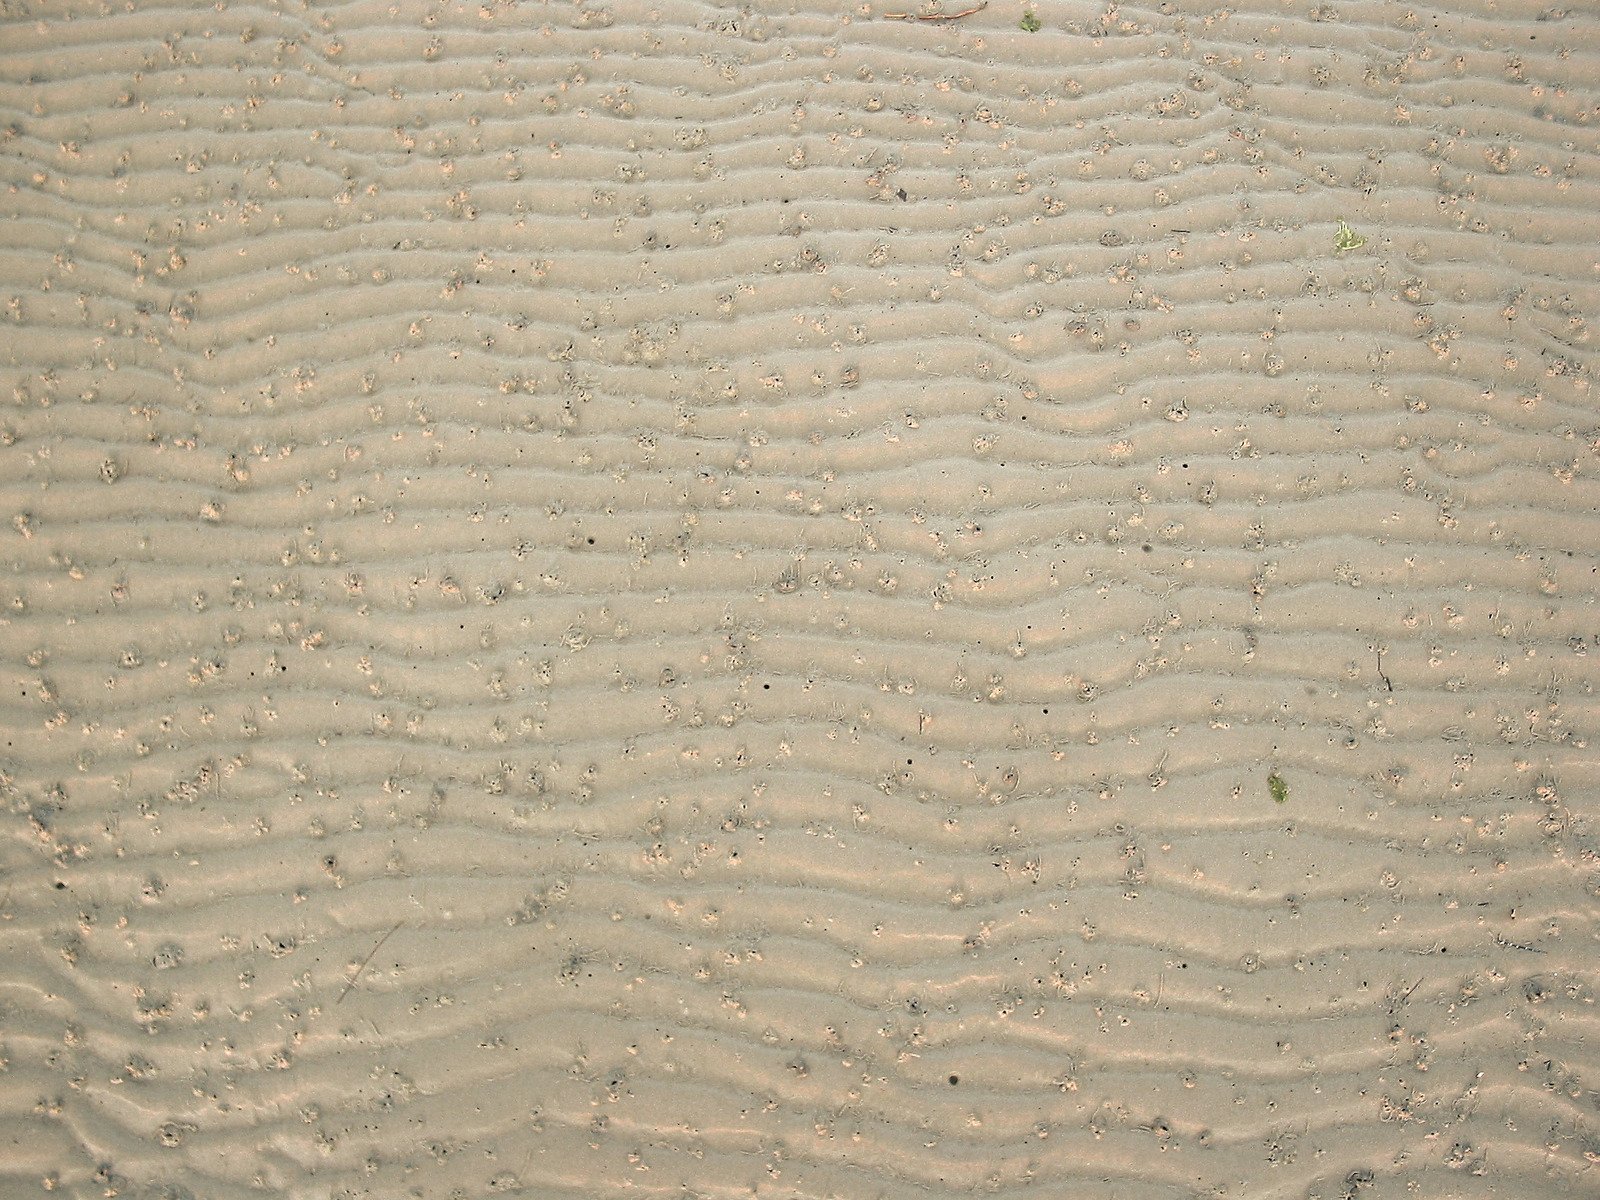 the sand on this beach looks like ripples in a sea